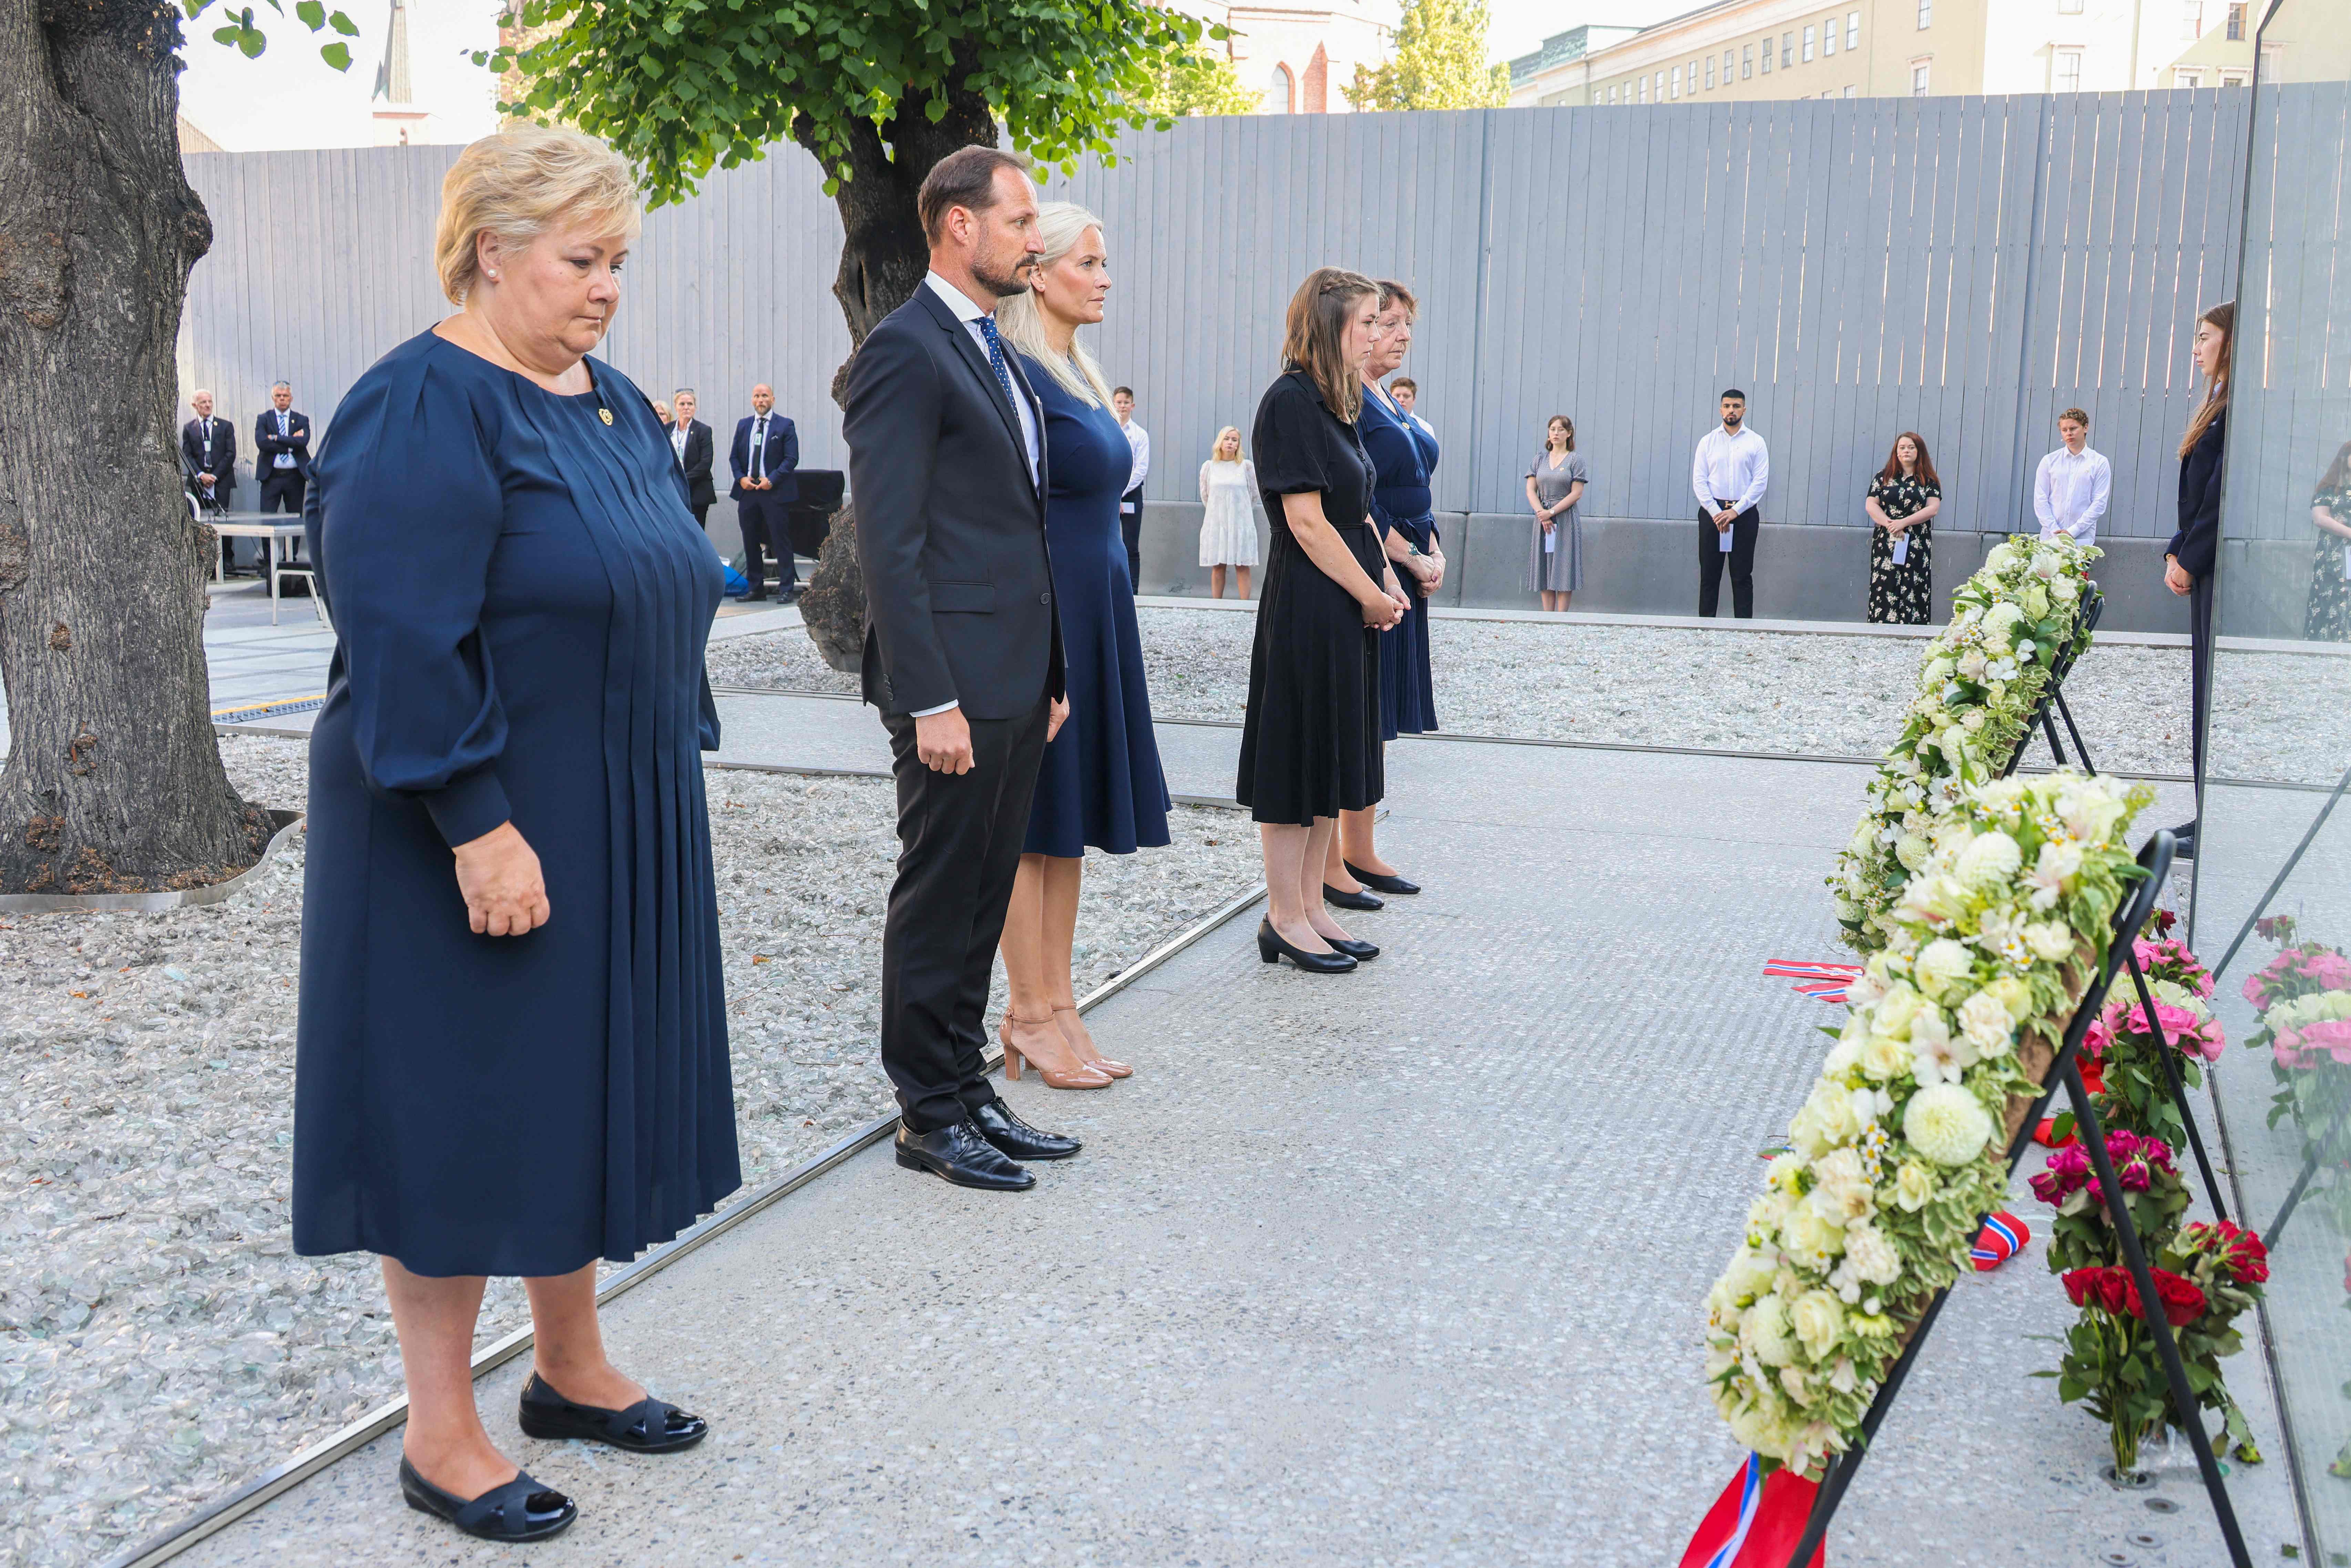 (L-R) Norway's Prime Minister Erna Solberg, Crown Prince Haakon Magnus, Crown Princess Mette-Marit, Utoya massacre survivor Astrid Eide Hoem and the leader of the National Support Group Lisbeth Kristine Royneland attend a wreath-laying ceremony during the memorial service in the Government Quarter in Oslo